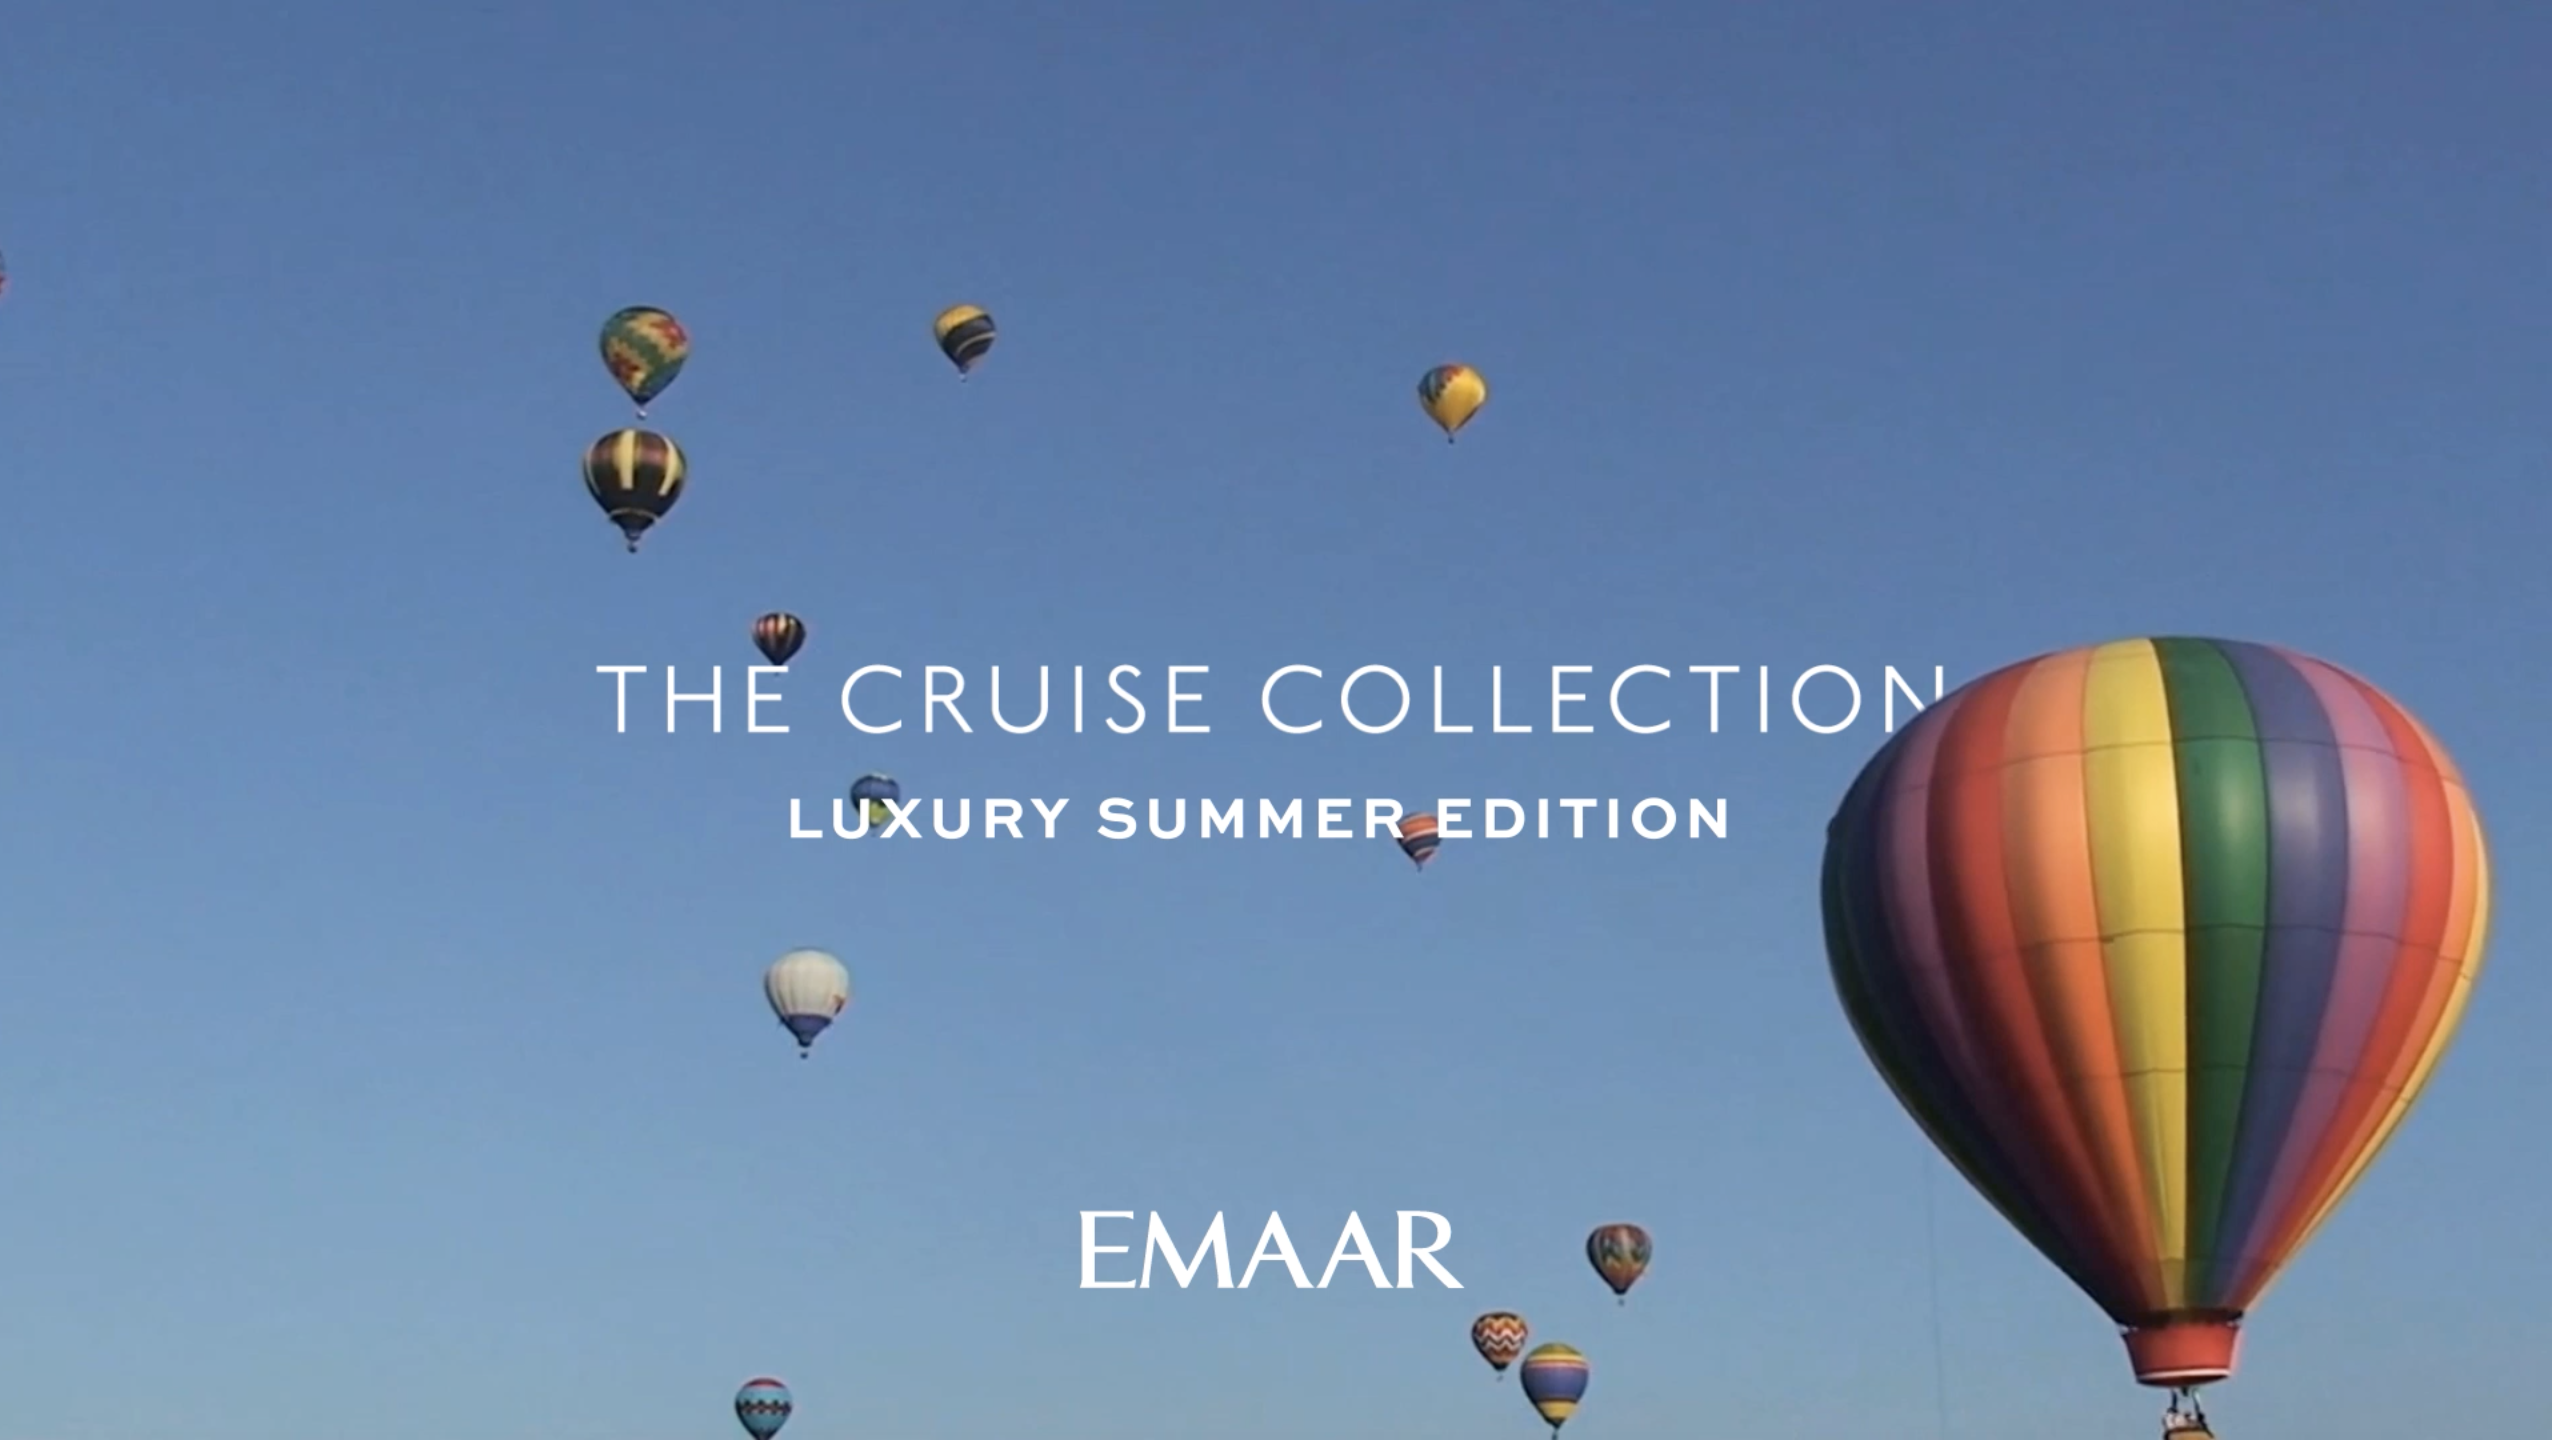 Emaar - The Cruise Collection - Luxury Summer Edition 2019